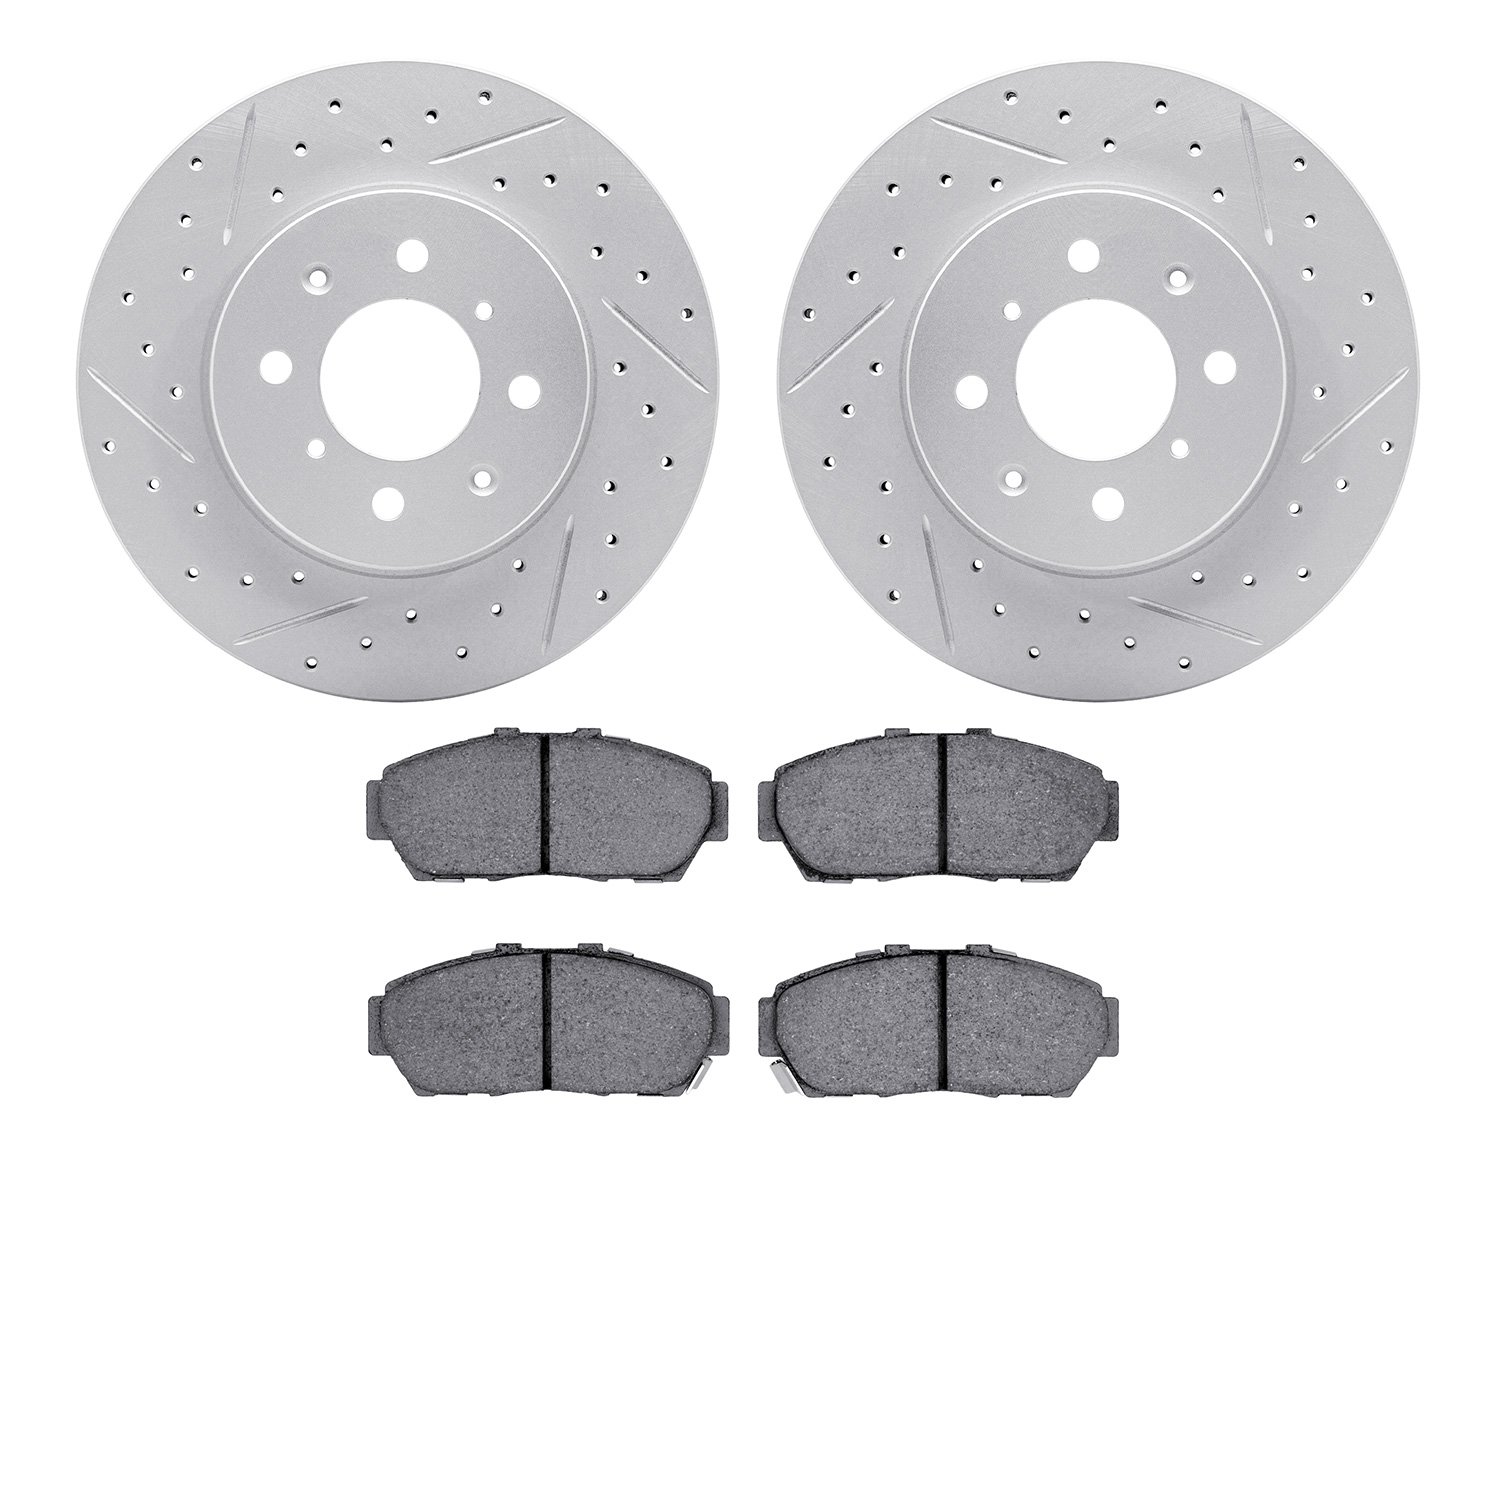 2502-59009 Geoperformance Drilled/Slotted Rotors w/5000 Advanced Brake Pads Kit, 1993-2001 Acura/Honda, Position: Front